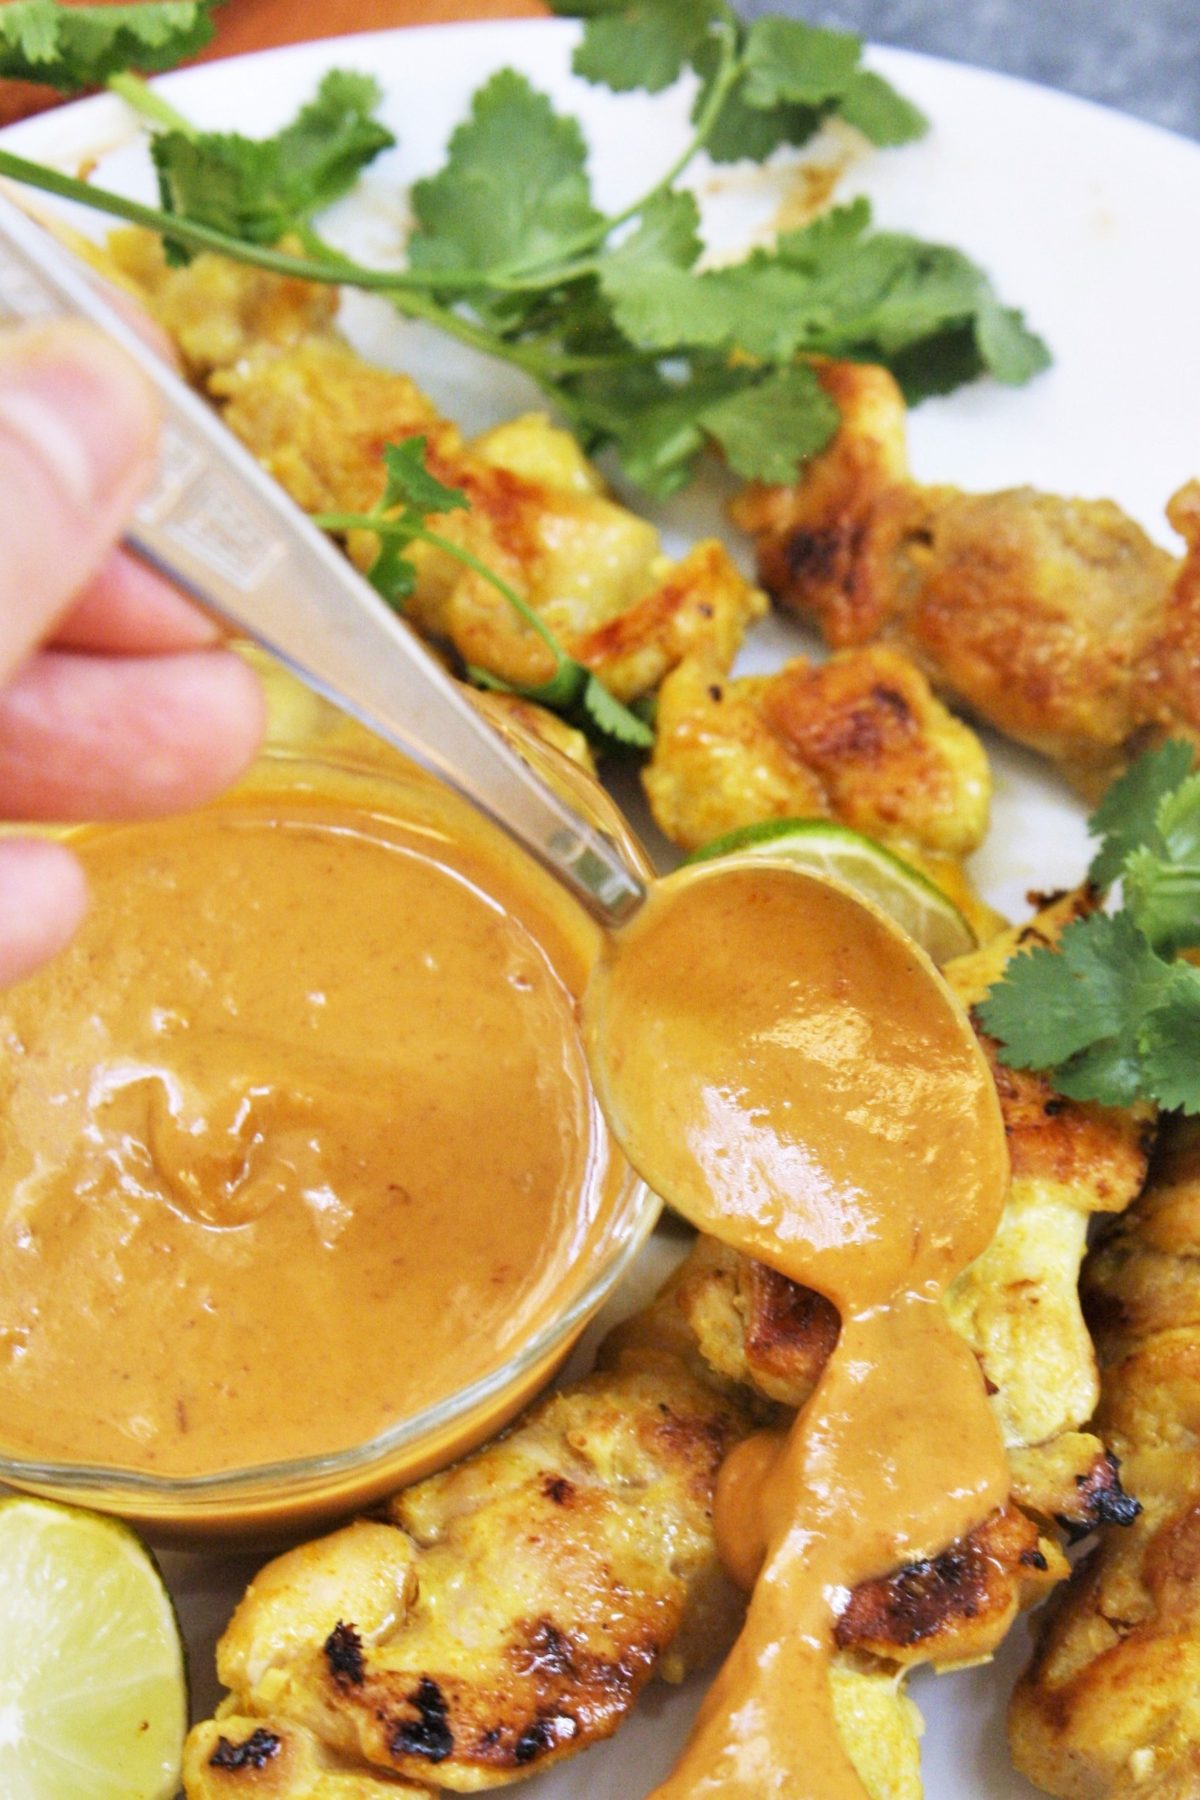 These tender and juicy chicken satay skewers are grilled and served with a creamy Vietnamese peanut sauce for dipping, making it a quick and delicious meal that the whole family will love!